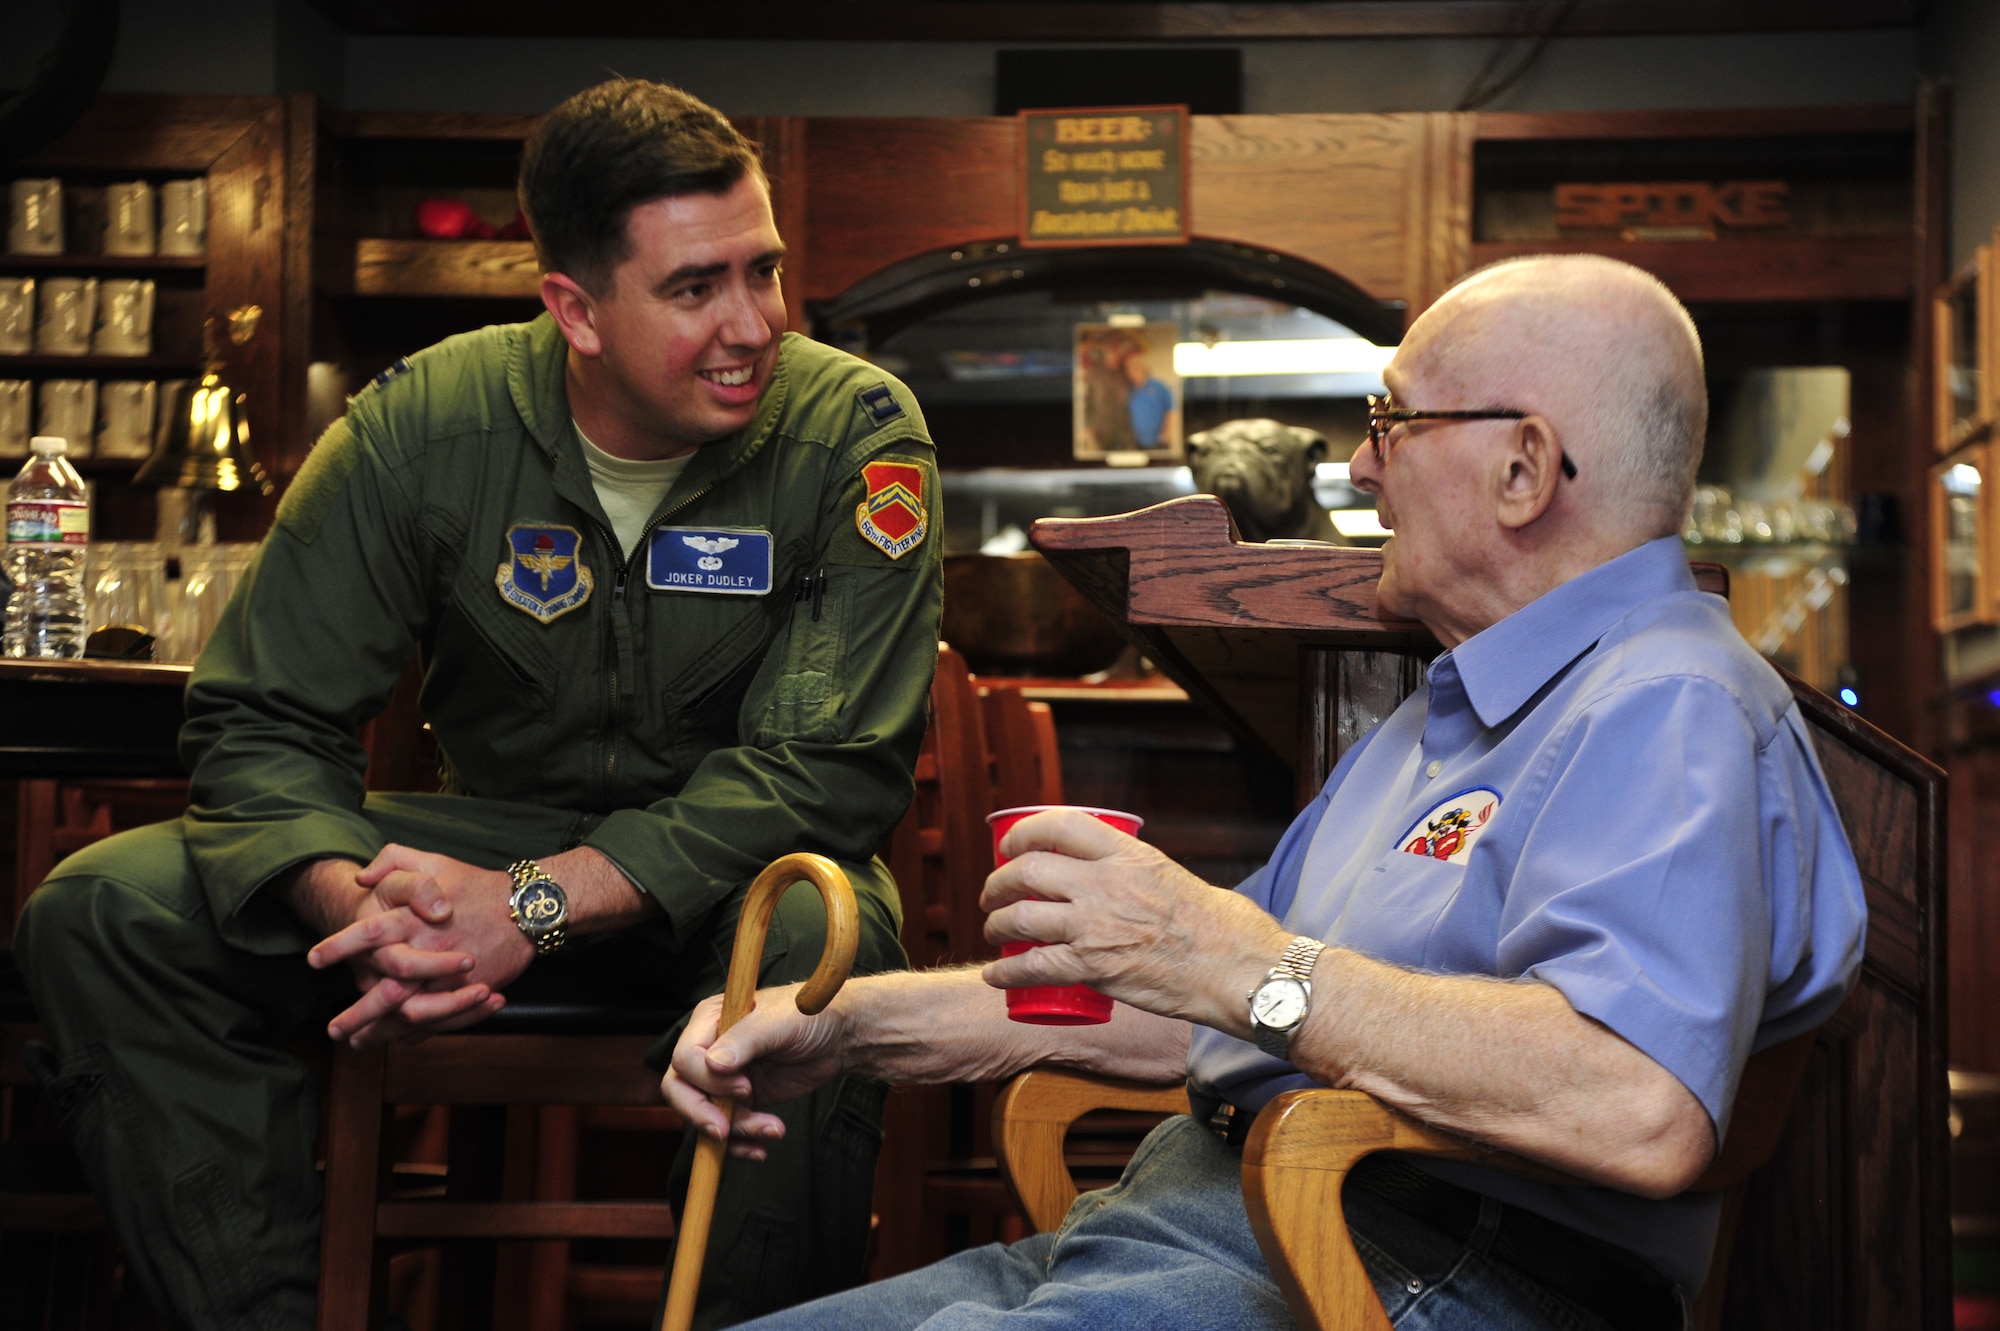 Capt. Brian Dudley, left, chats with retired Navy officer Anthony Canzonetta, a Korean War pilot, June 13, 2014, in the 62nd Fighter Squadron's heritage room on Luke Air Force Base, Ariz. During their time together, Dudley and Canzonetta talked about topics ranging from flying, Canzonetta’s love for fast cars, his experience recovering from injuries, and transitioning to civilian life. The tour was planned for Canzonetta’s 83rd birthday. Dudley is the 62nd FS's A-Flight commander and an instructor pilot. (U.S. Air Force photo/Senior Airman Grace Lee)